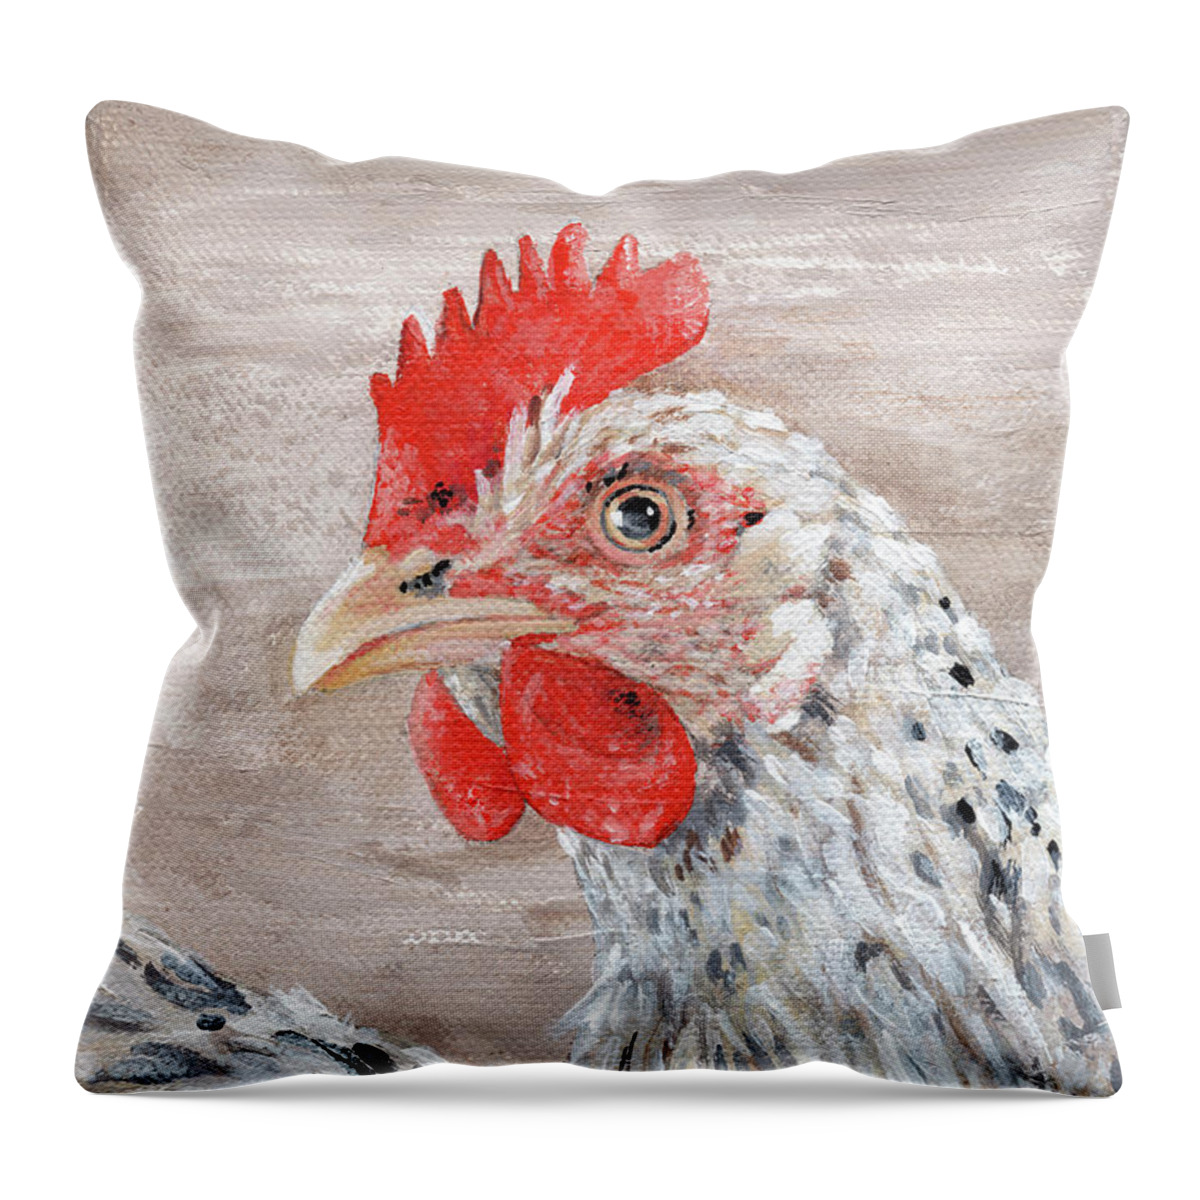 Spring Chicken Is A New Hen Original Fine Art Painting By Annie Troe. Can Be Paired With Egg-scuse-me Painting Throw Pillow featuring the painting Spring Chicken - Hen Painting by Annie Troe